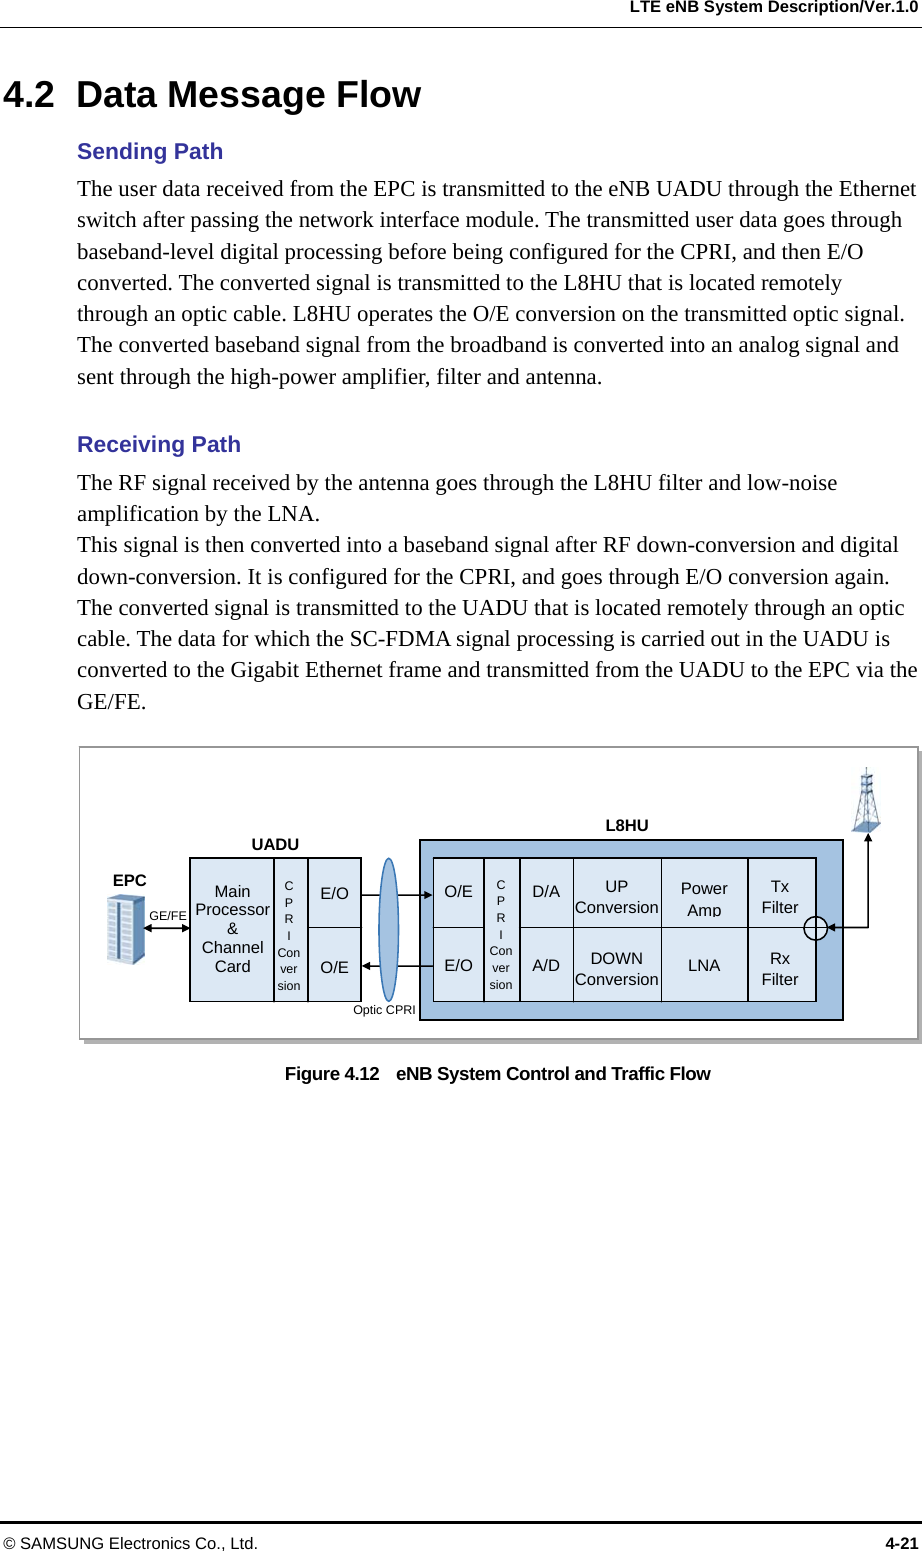  LTE eNB System Description/Ver.1.0 4.2  Data Message Flow Sending Path The user data received from the EPC is transmitted to the eNB UADU through the Ethernet switch after passing the network interface module. The transmitted user data goes through baseband-level digital processing before being configured for the CPRI, and then E/O converted. The converted signal is transmitted to the L8HU that is located remotely through an optic cable. L8HU operates the O/E conversion on the transmitted optic signal. The converted baseband signal from the broadband is converted into an analog signal and sent through the high-power amplifier, filter and antenna.  Receiving Path The RF signal received by the antenna goes through the L8HU filter and low-noise amplification by the LNA. This signal is then converted into a baseband signal after RF down-conversion and digital down-conversion. It is configured for the CPRI, and goes through E/O conversion again.   The converted signal is transmitted to the UADU that is located remotely through an optic cable. The data for which the SC-FDMA signal processing is carried out in the UADU is converted to the Gigabit Ethernet frame and transmitted from the UADU to the EPC via the GE/FE.  L8HU Figure 4.12    eNB System Control and Traffic Flow  Main Processor &amp; Channel Card C P R I Conversion E/O O/E GE/FE UADU Optic CPRI E/O O/E A/D D/A C P R I Conversion  DOWN ConversionUP ConversionLNA Power AmpRx Filter Tx Filter EPC © SAMSUNG Electronics Co., Ltd.  4-21 